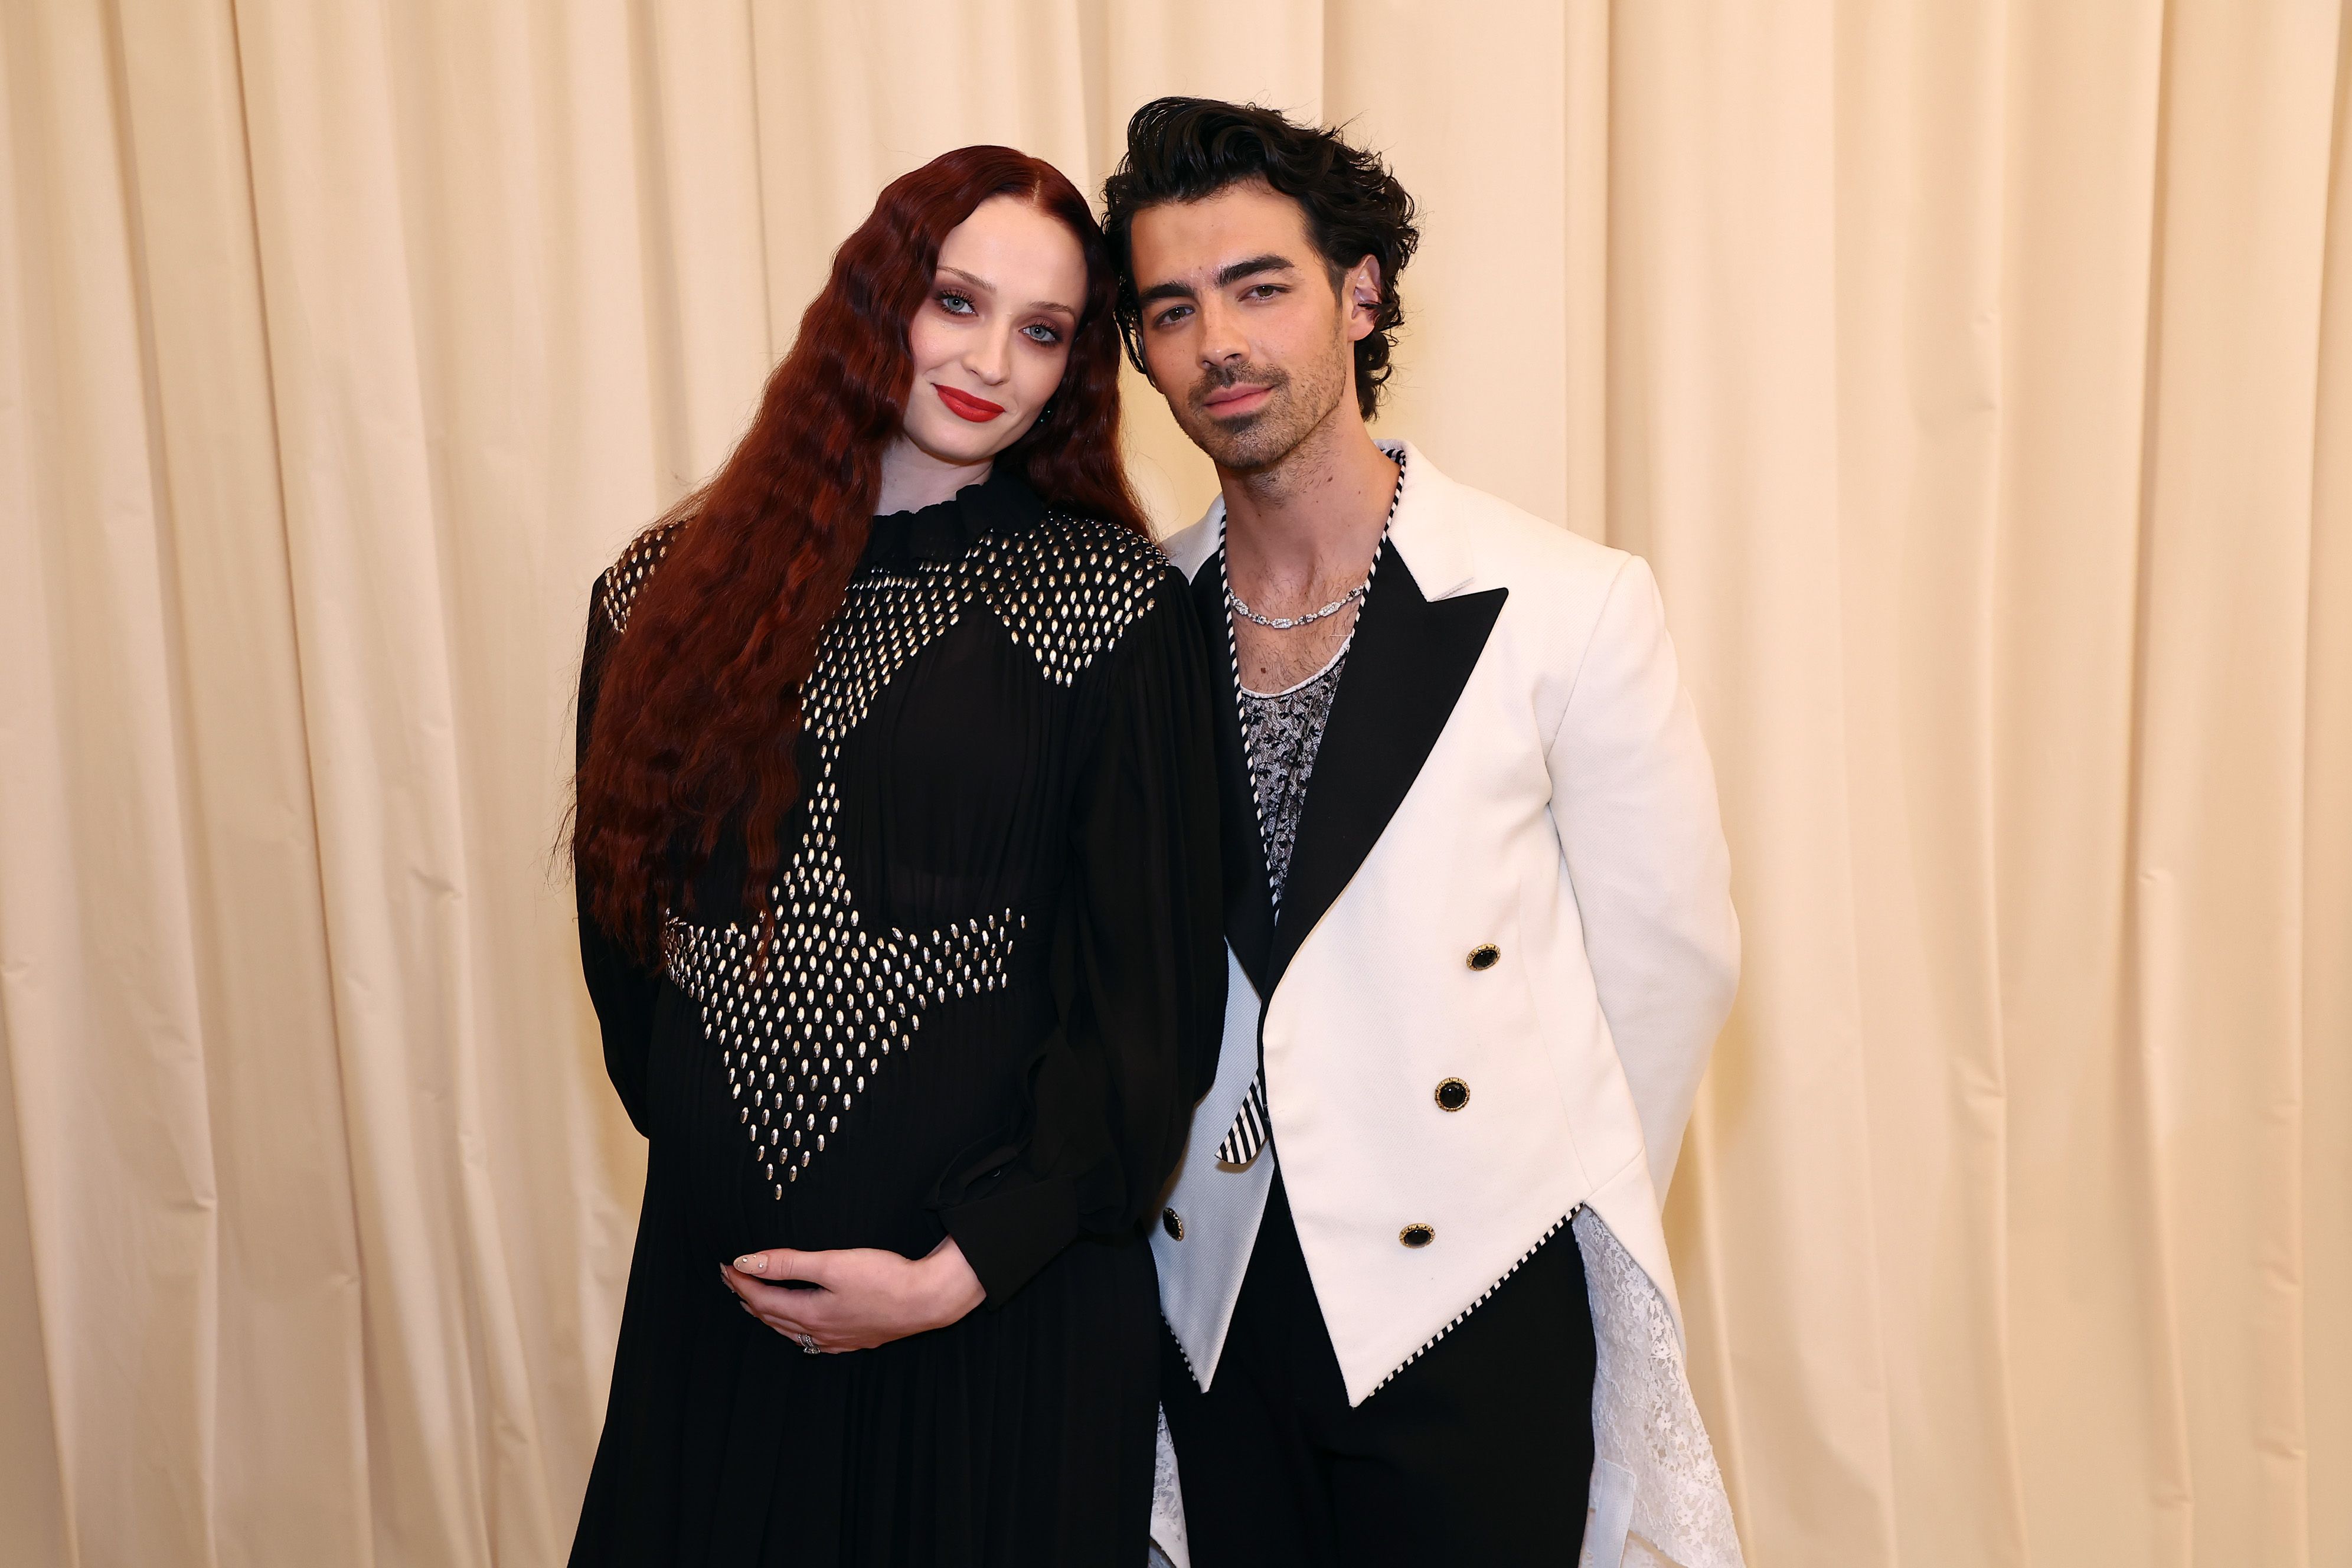 Sophie Turner shows off baby bump and more star snaps